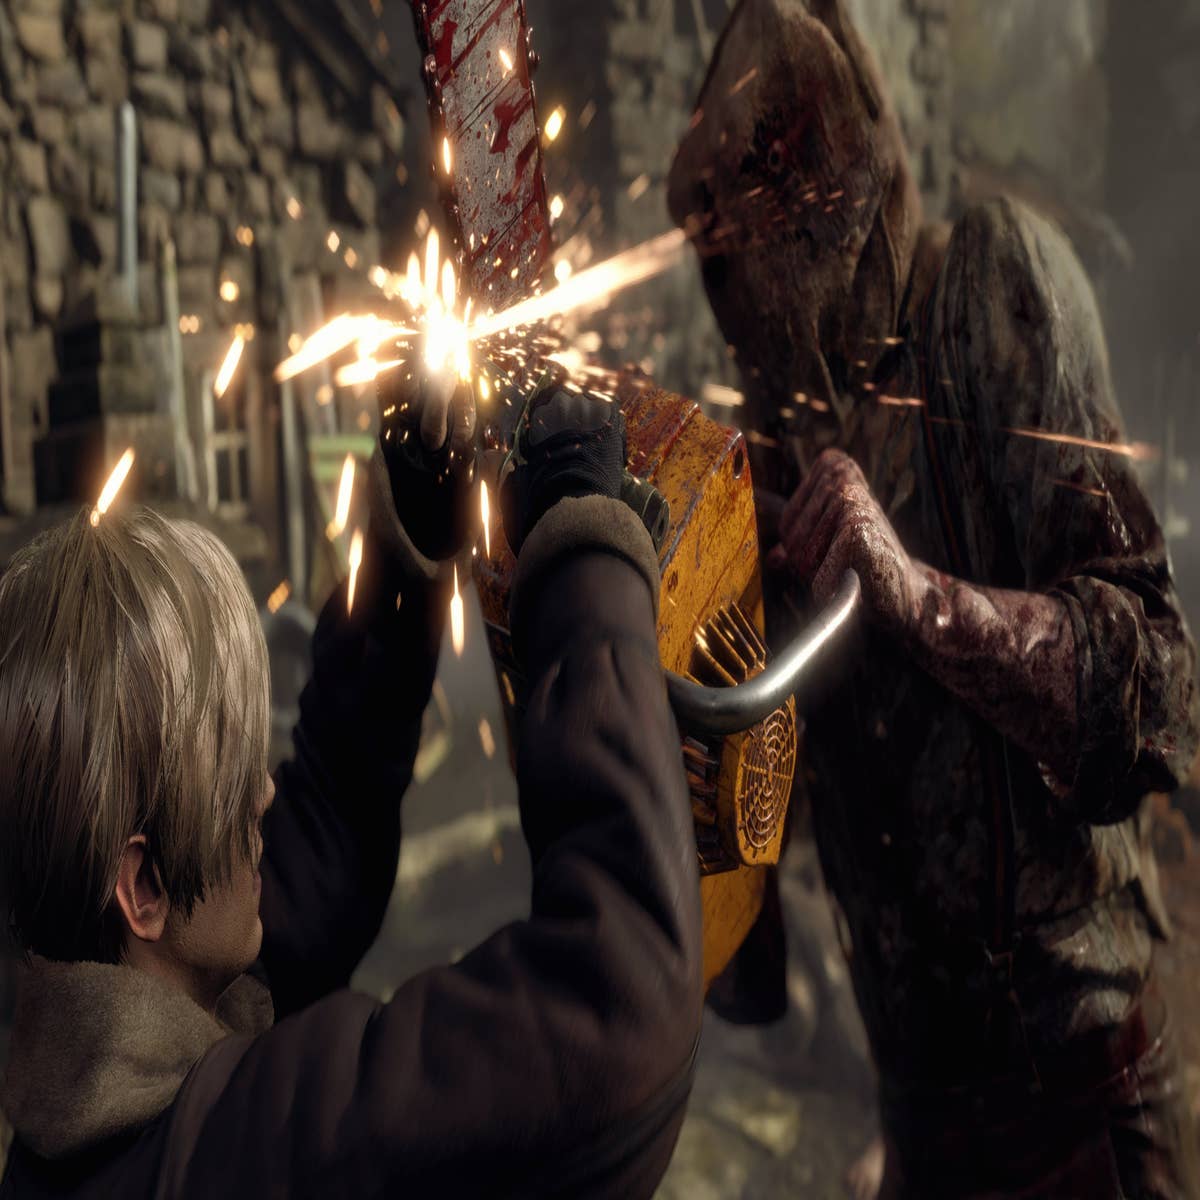 Resident Evil 4 Remake Gets Microtransactions With the Free Mercenaries DLC